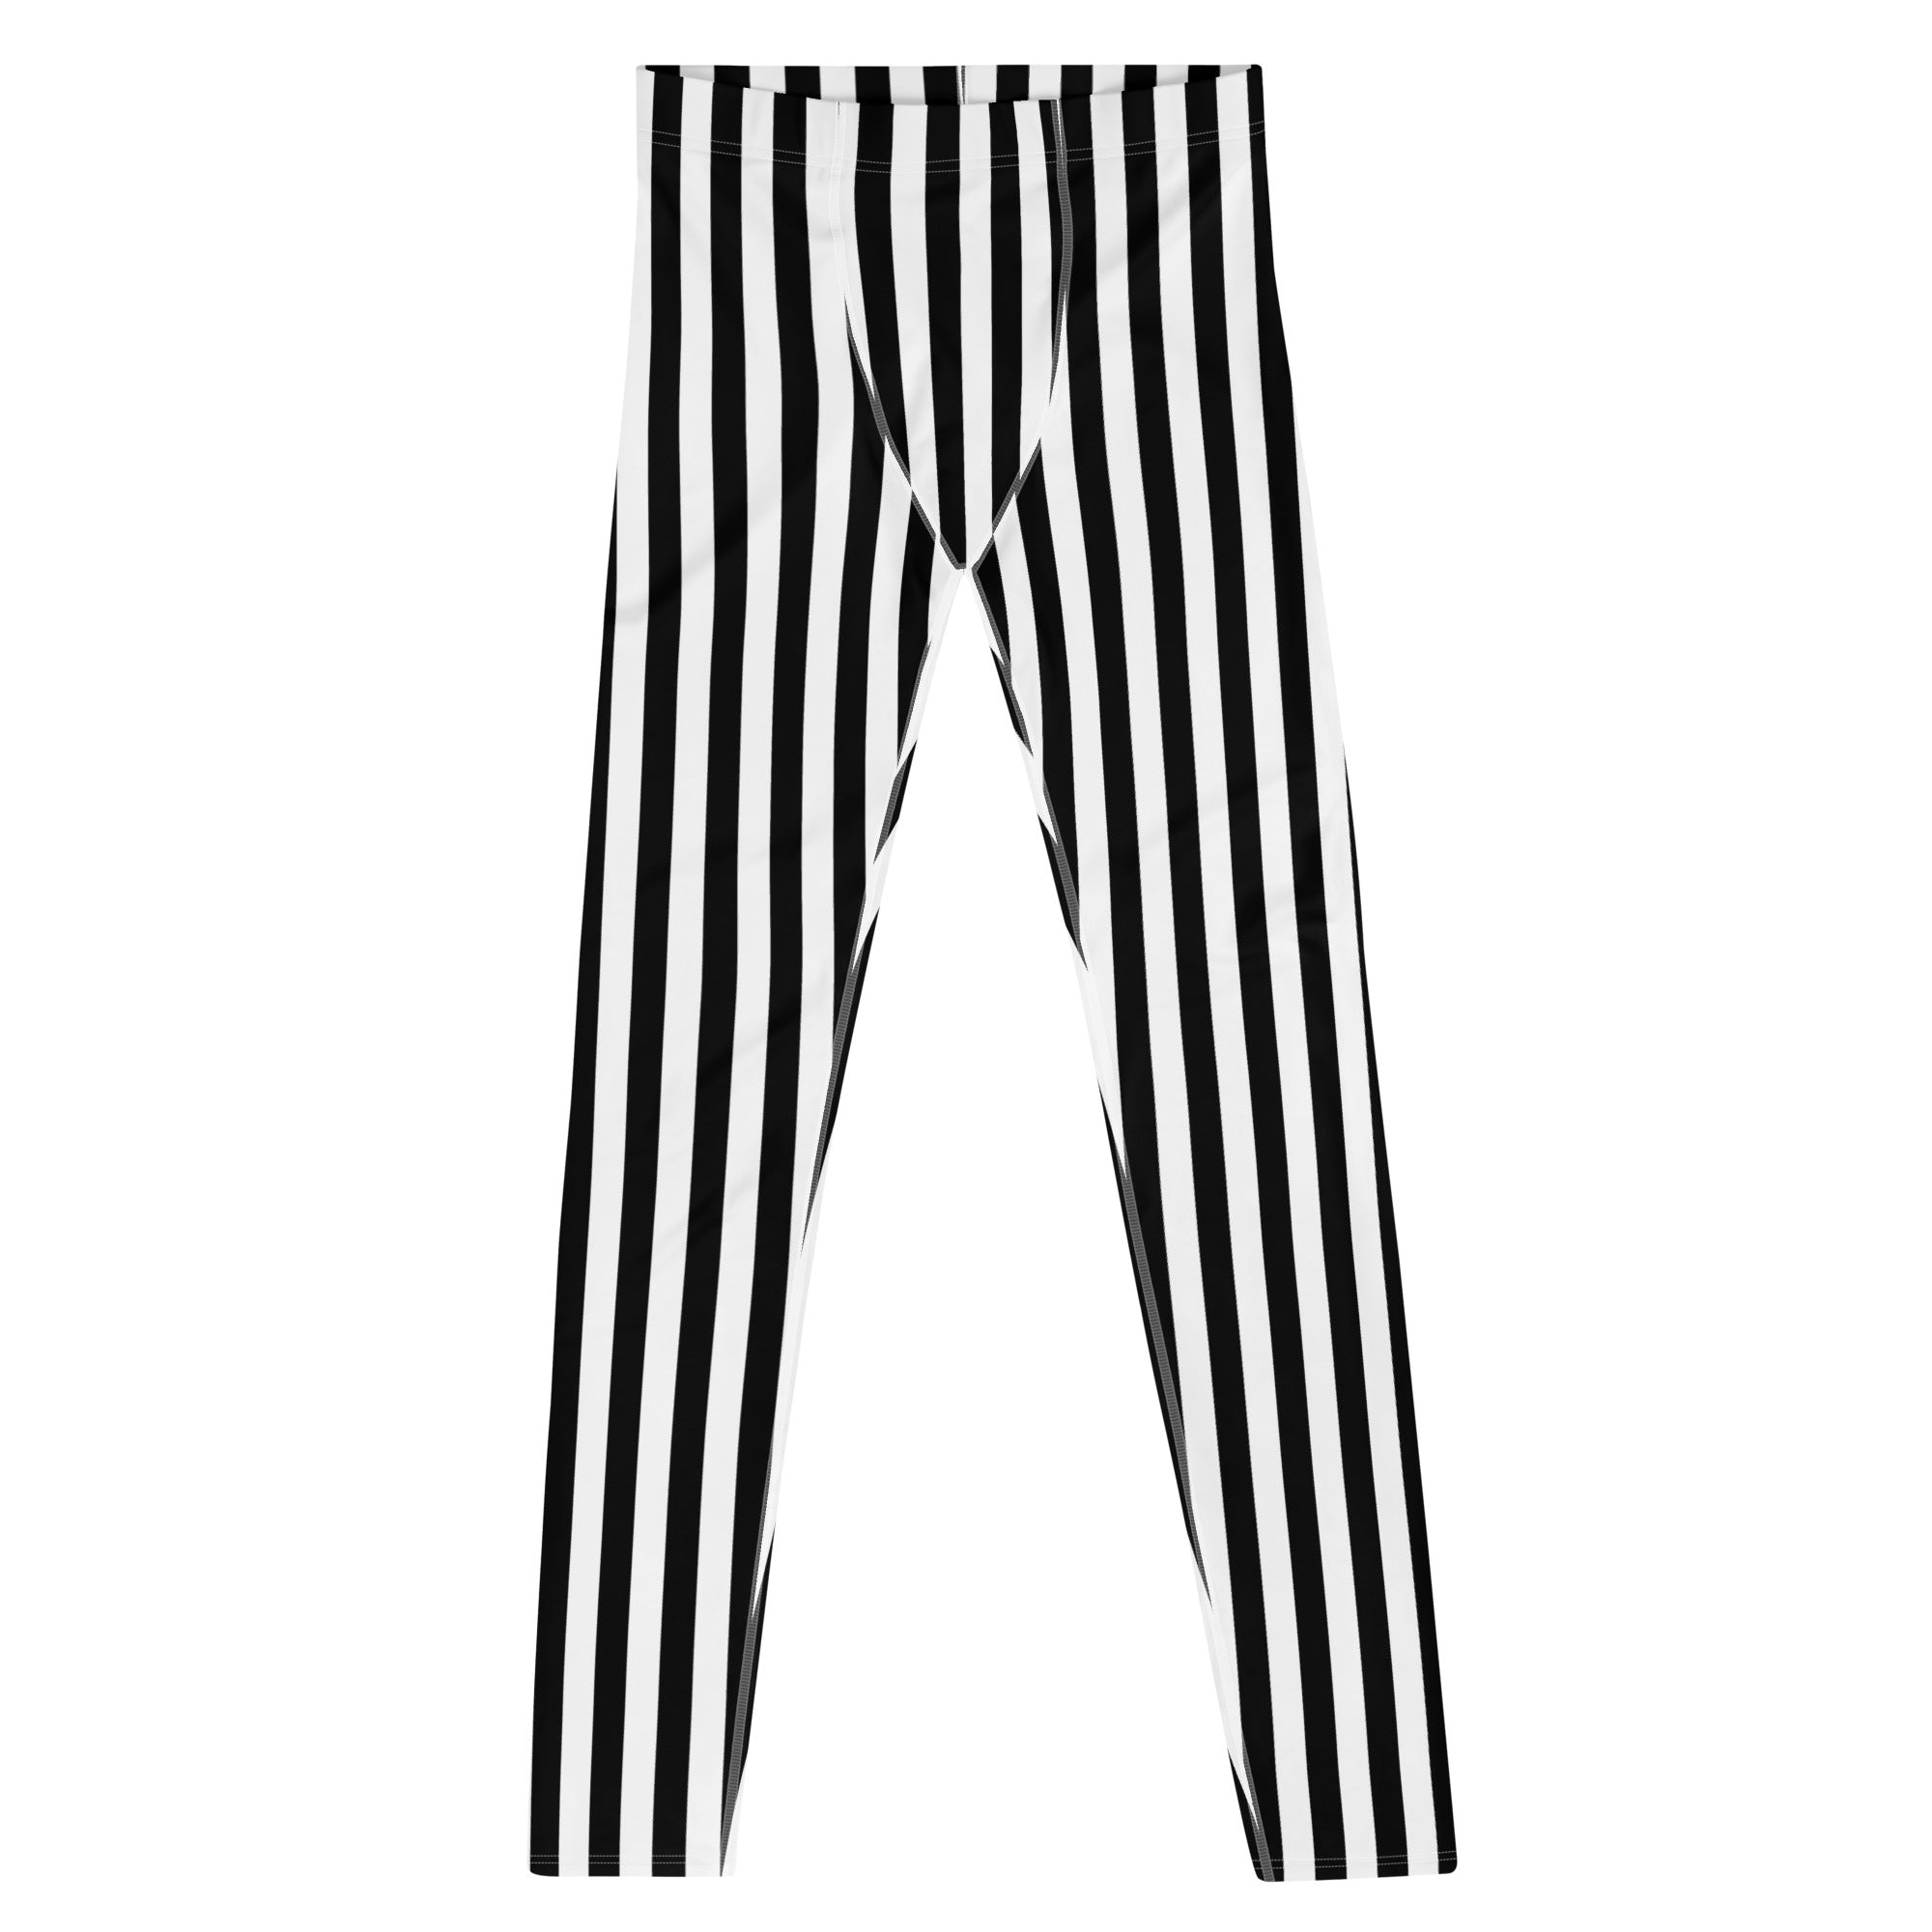 Black and White Vertical Striped Pants Mens, Vintage Vertical Striped  Trouser Pants Mens for Sale